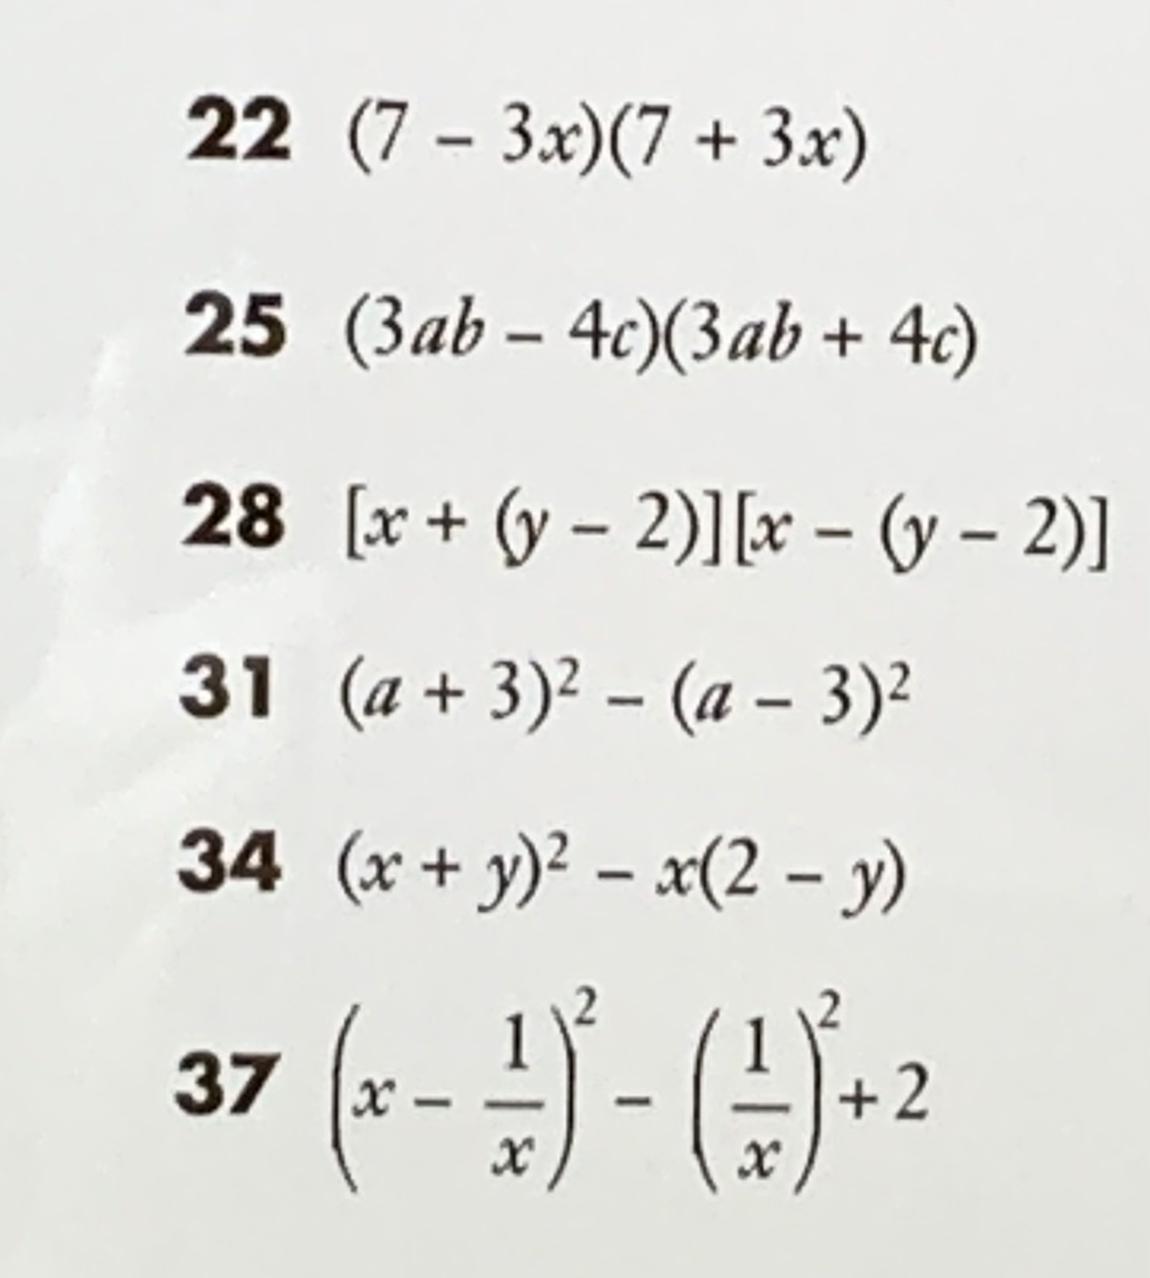 I Need Help Solving Questions 28 And 34 By Expanding And Simplifying Please 